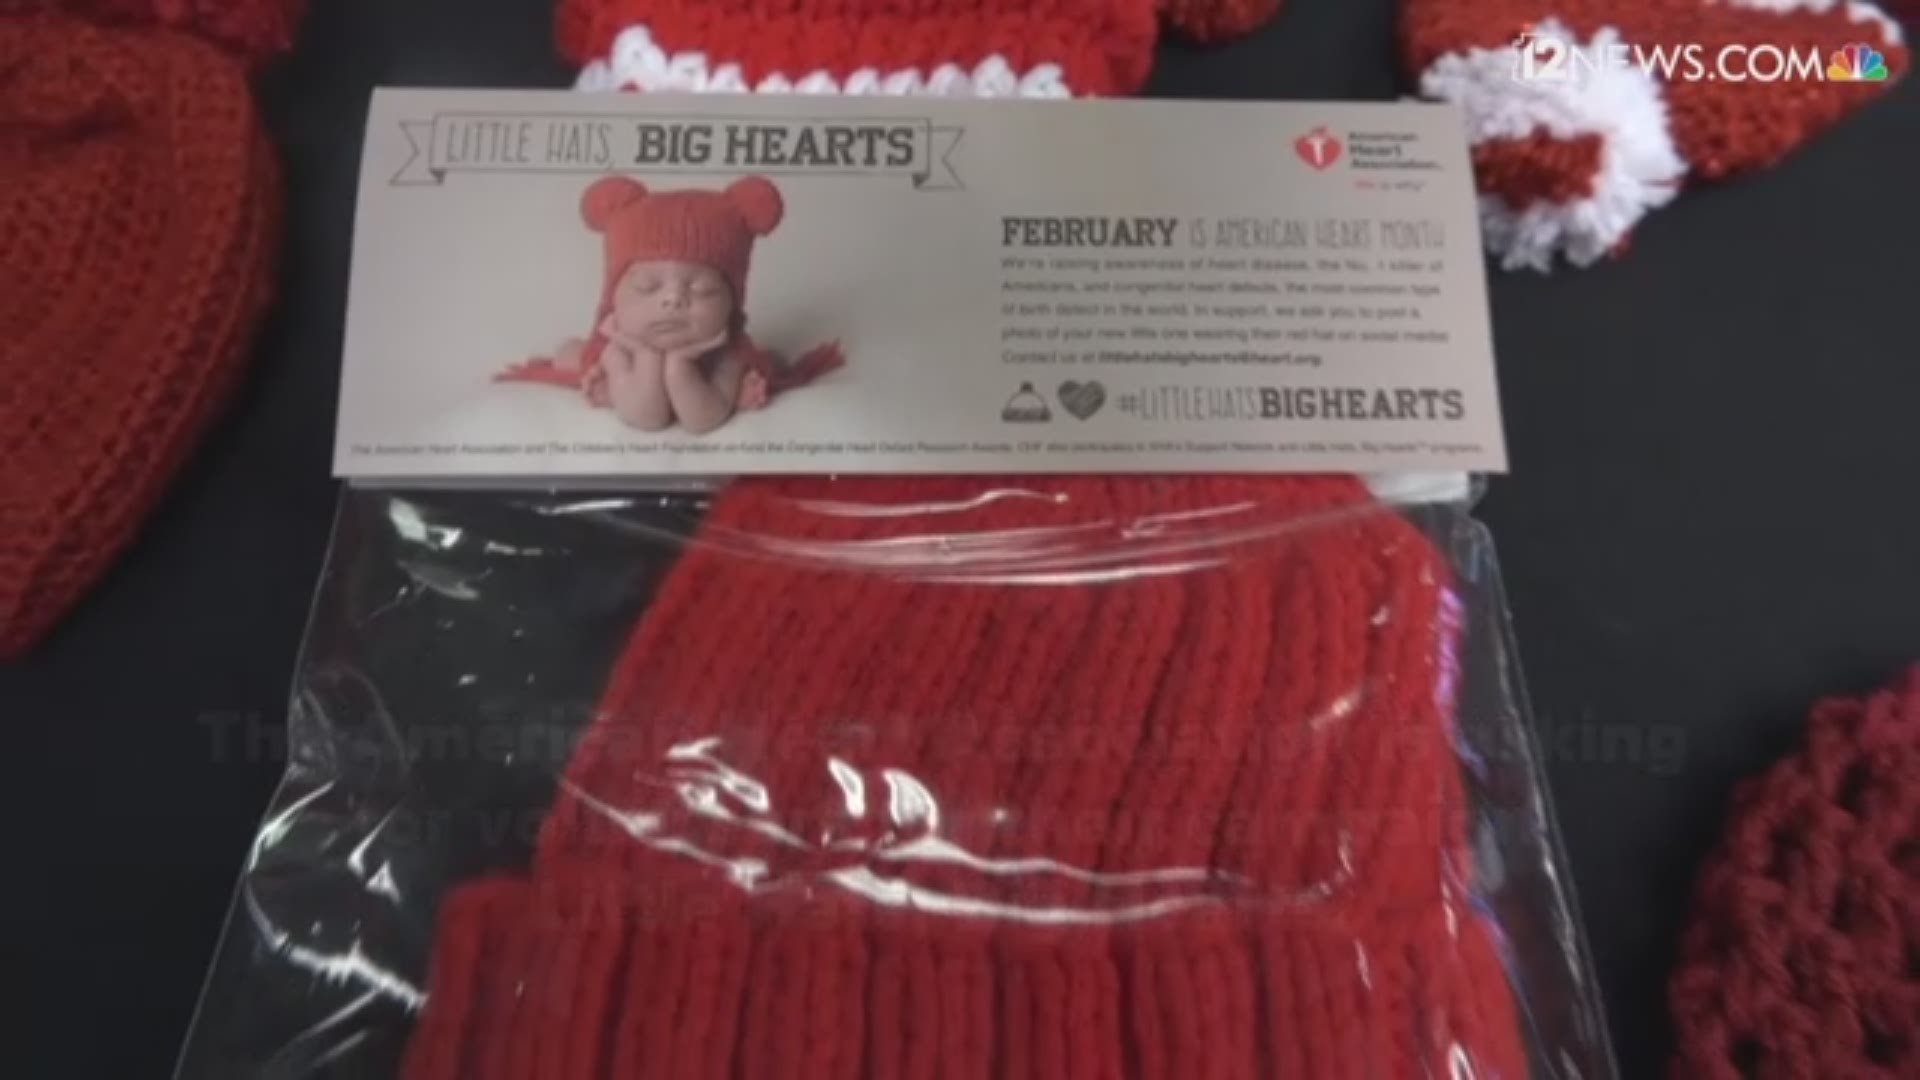 The American Heart Association distributes red hats to new born babies to make parents aware of congenital heart defects.